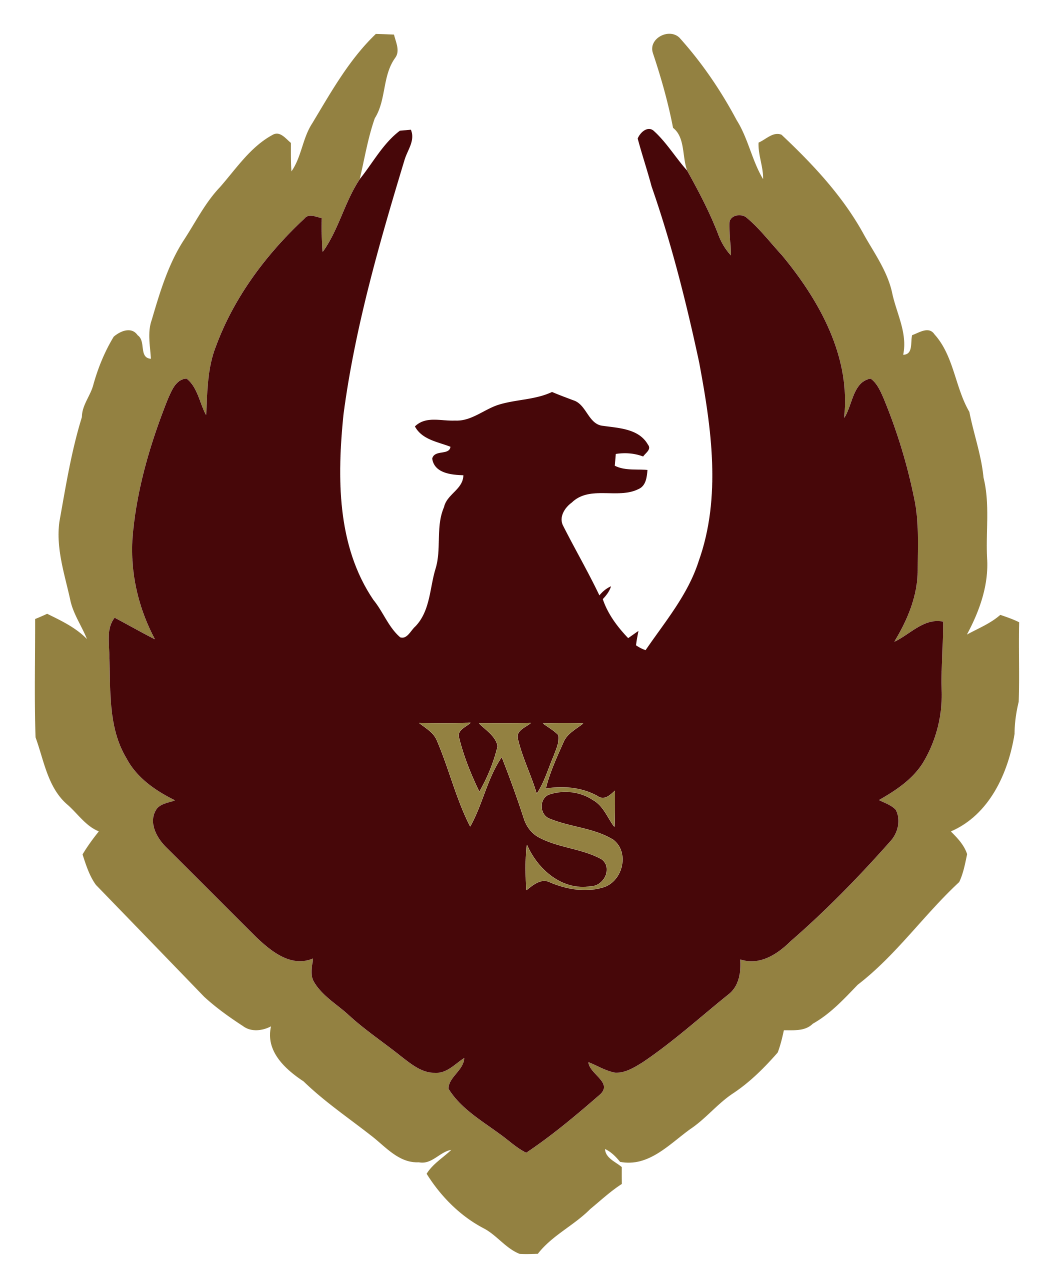 A logo with a bird and the letter ws on it, the logo for Woolston-Steen Theological Seminary.